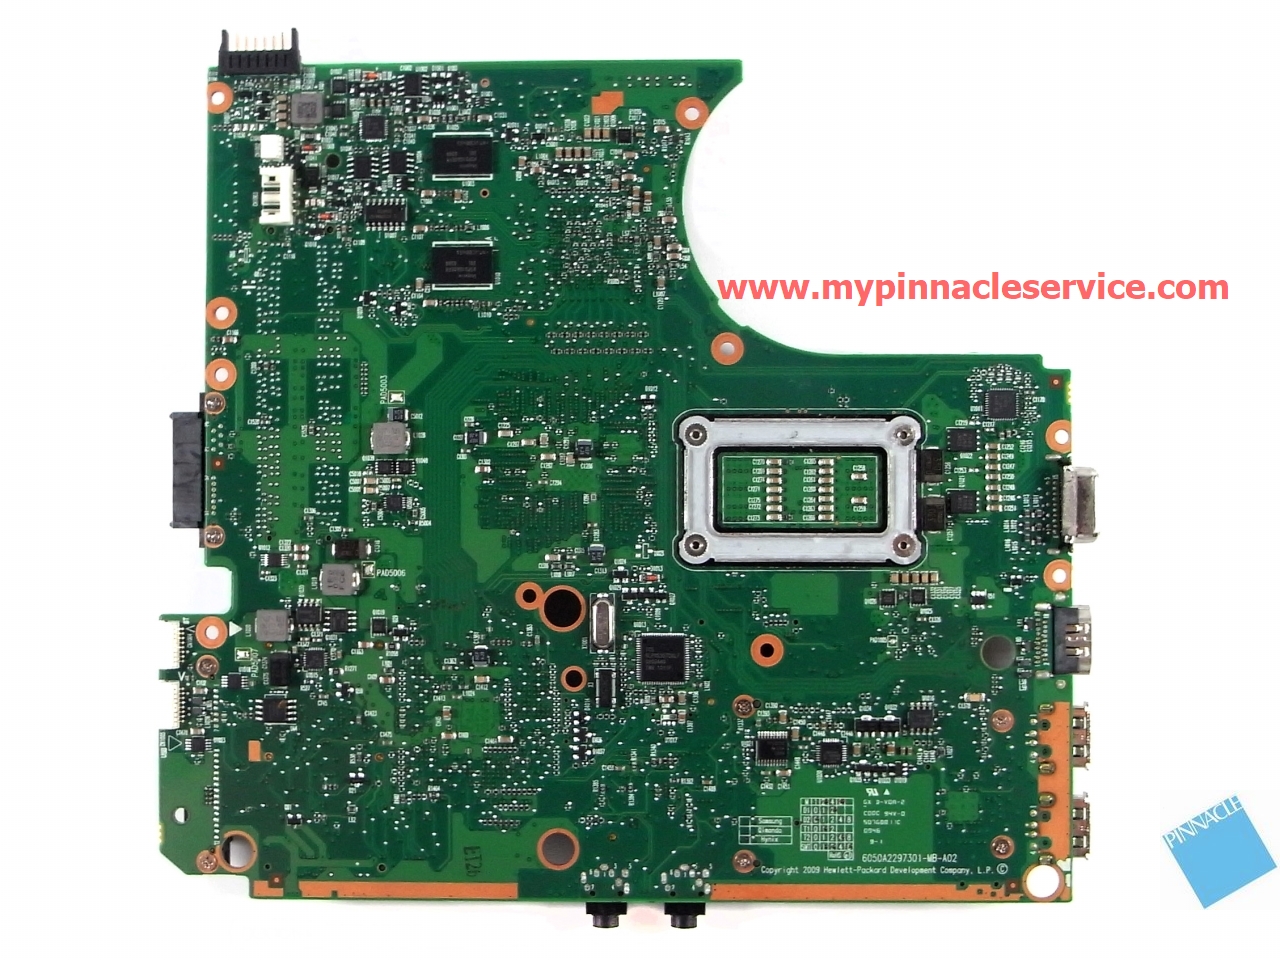 583077-001-motherboard-for-hp-probook-4411s-4510s-4710s-6050a2297301-r0010743.jpg